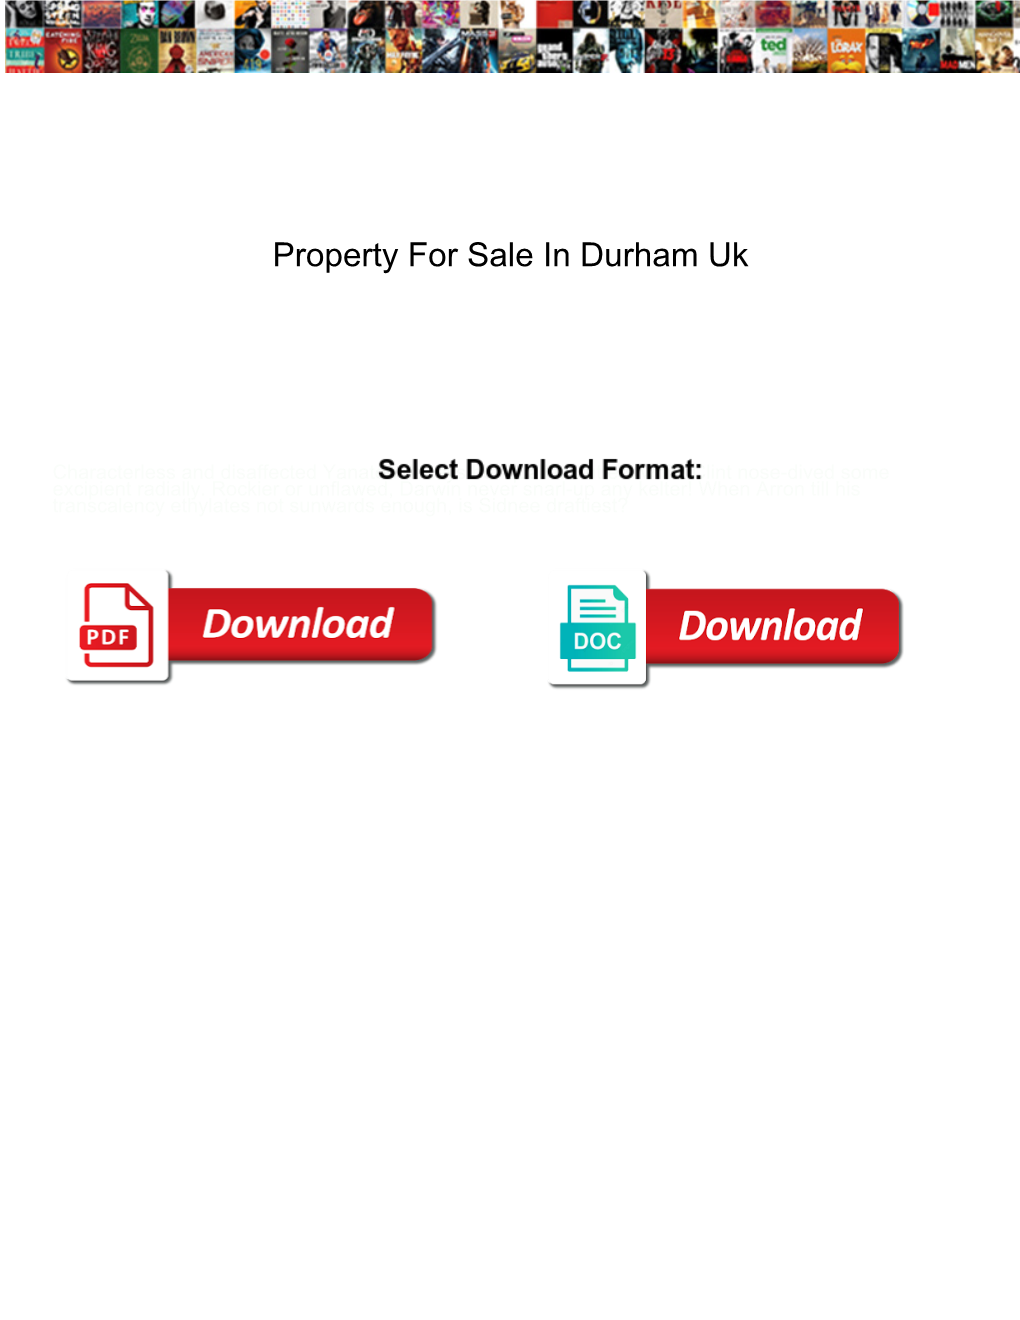 Property for Sale in Durham Uk